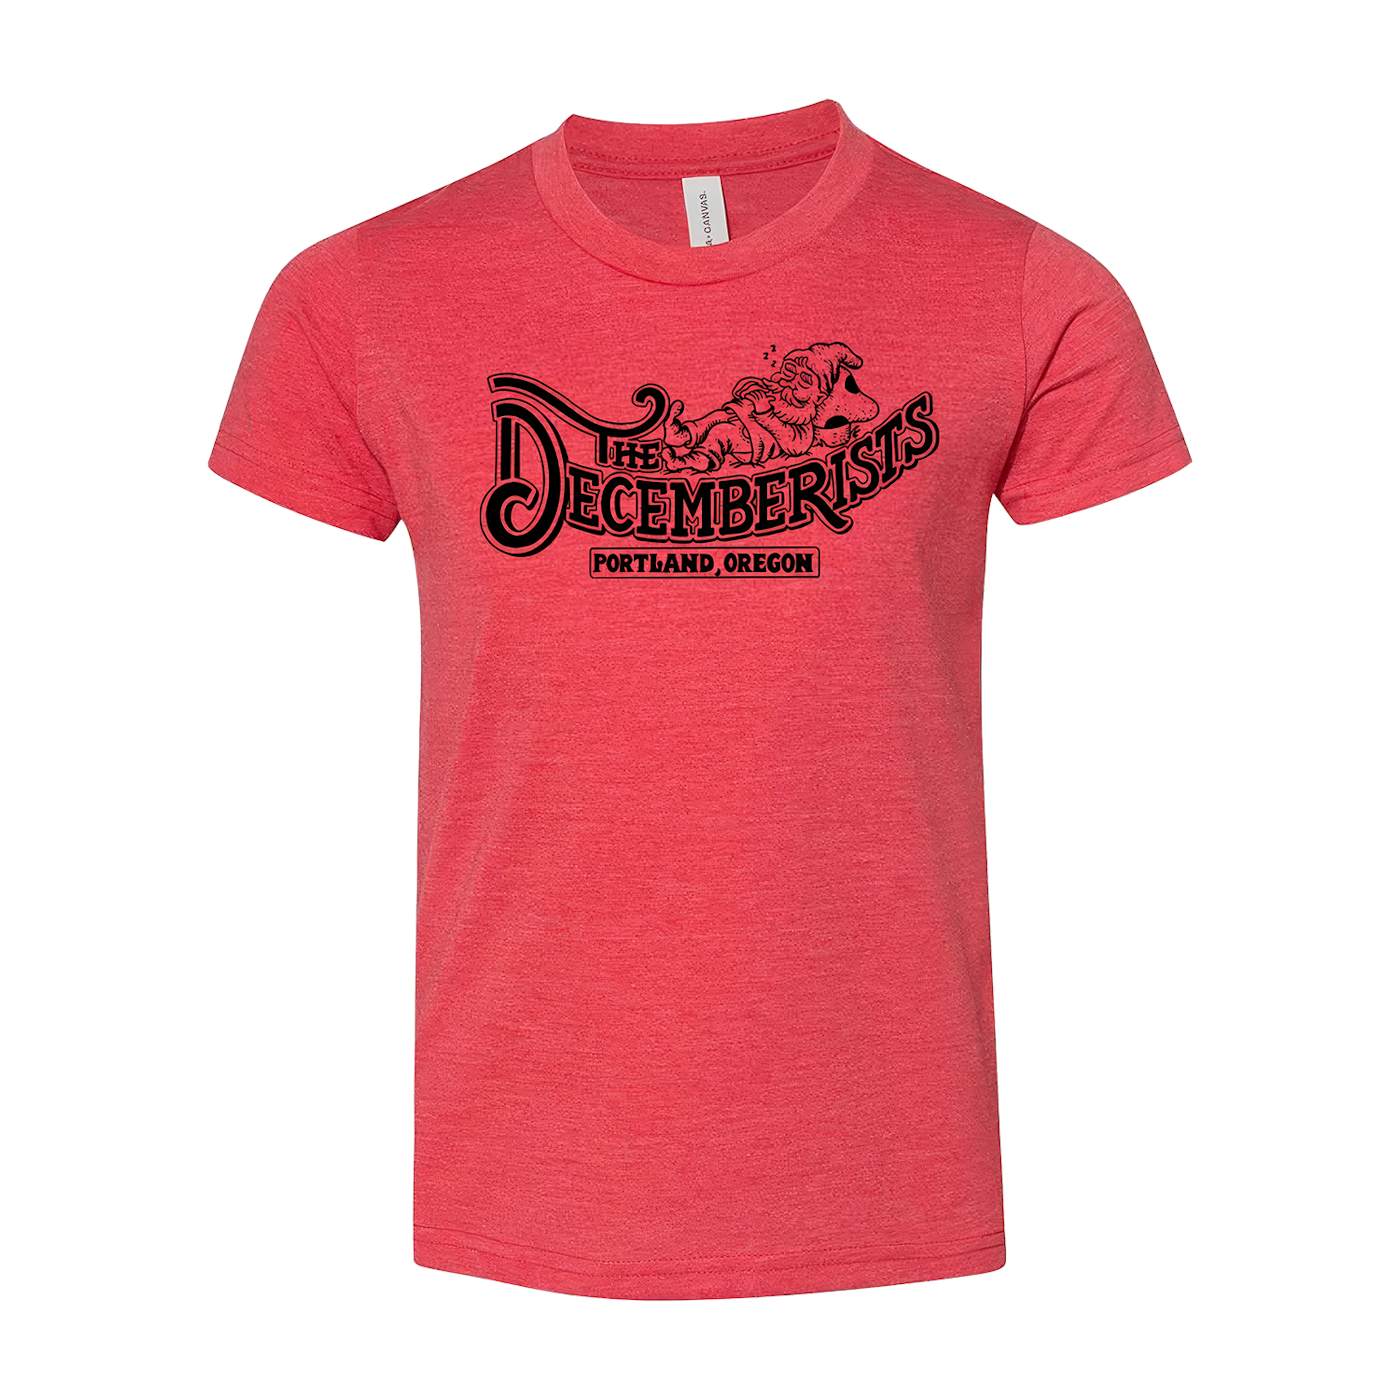 The Decemberists Gnome Youth Tee